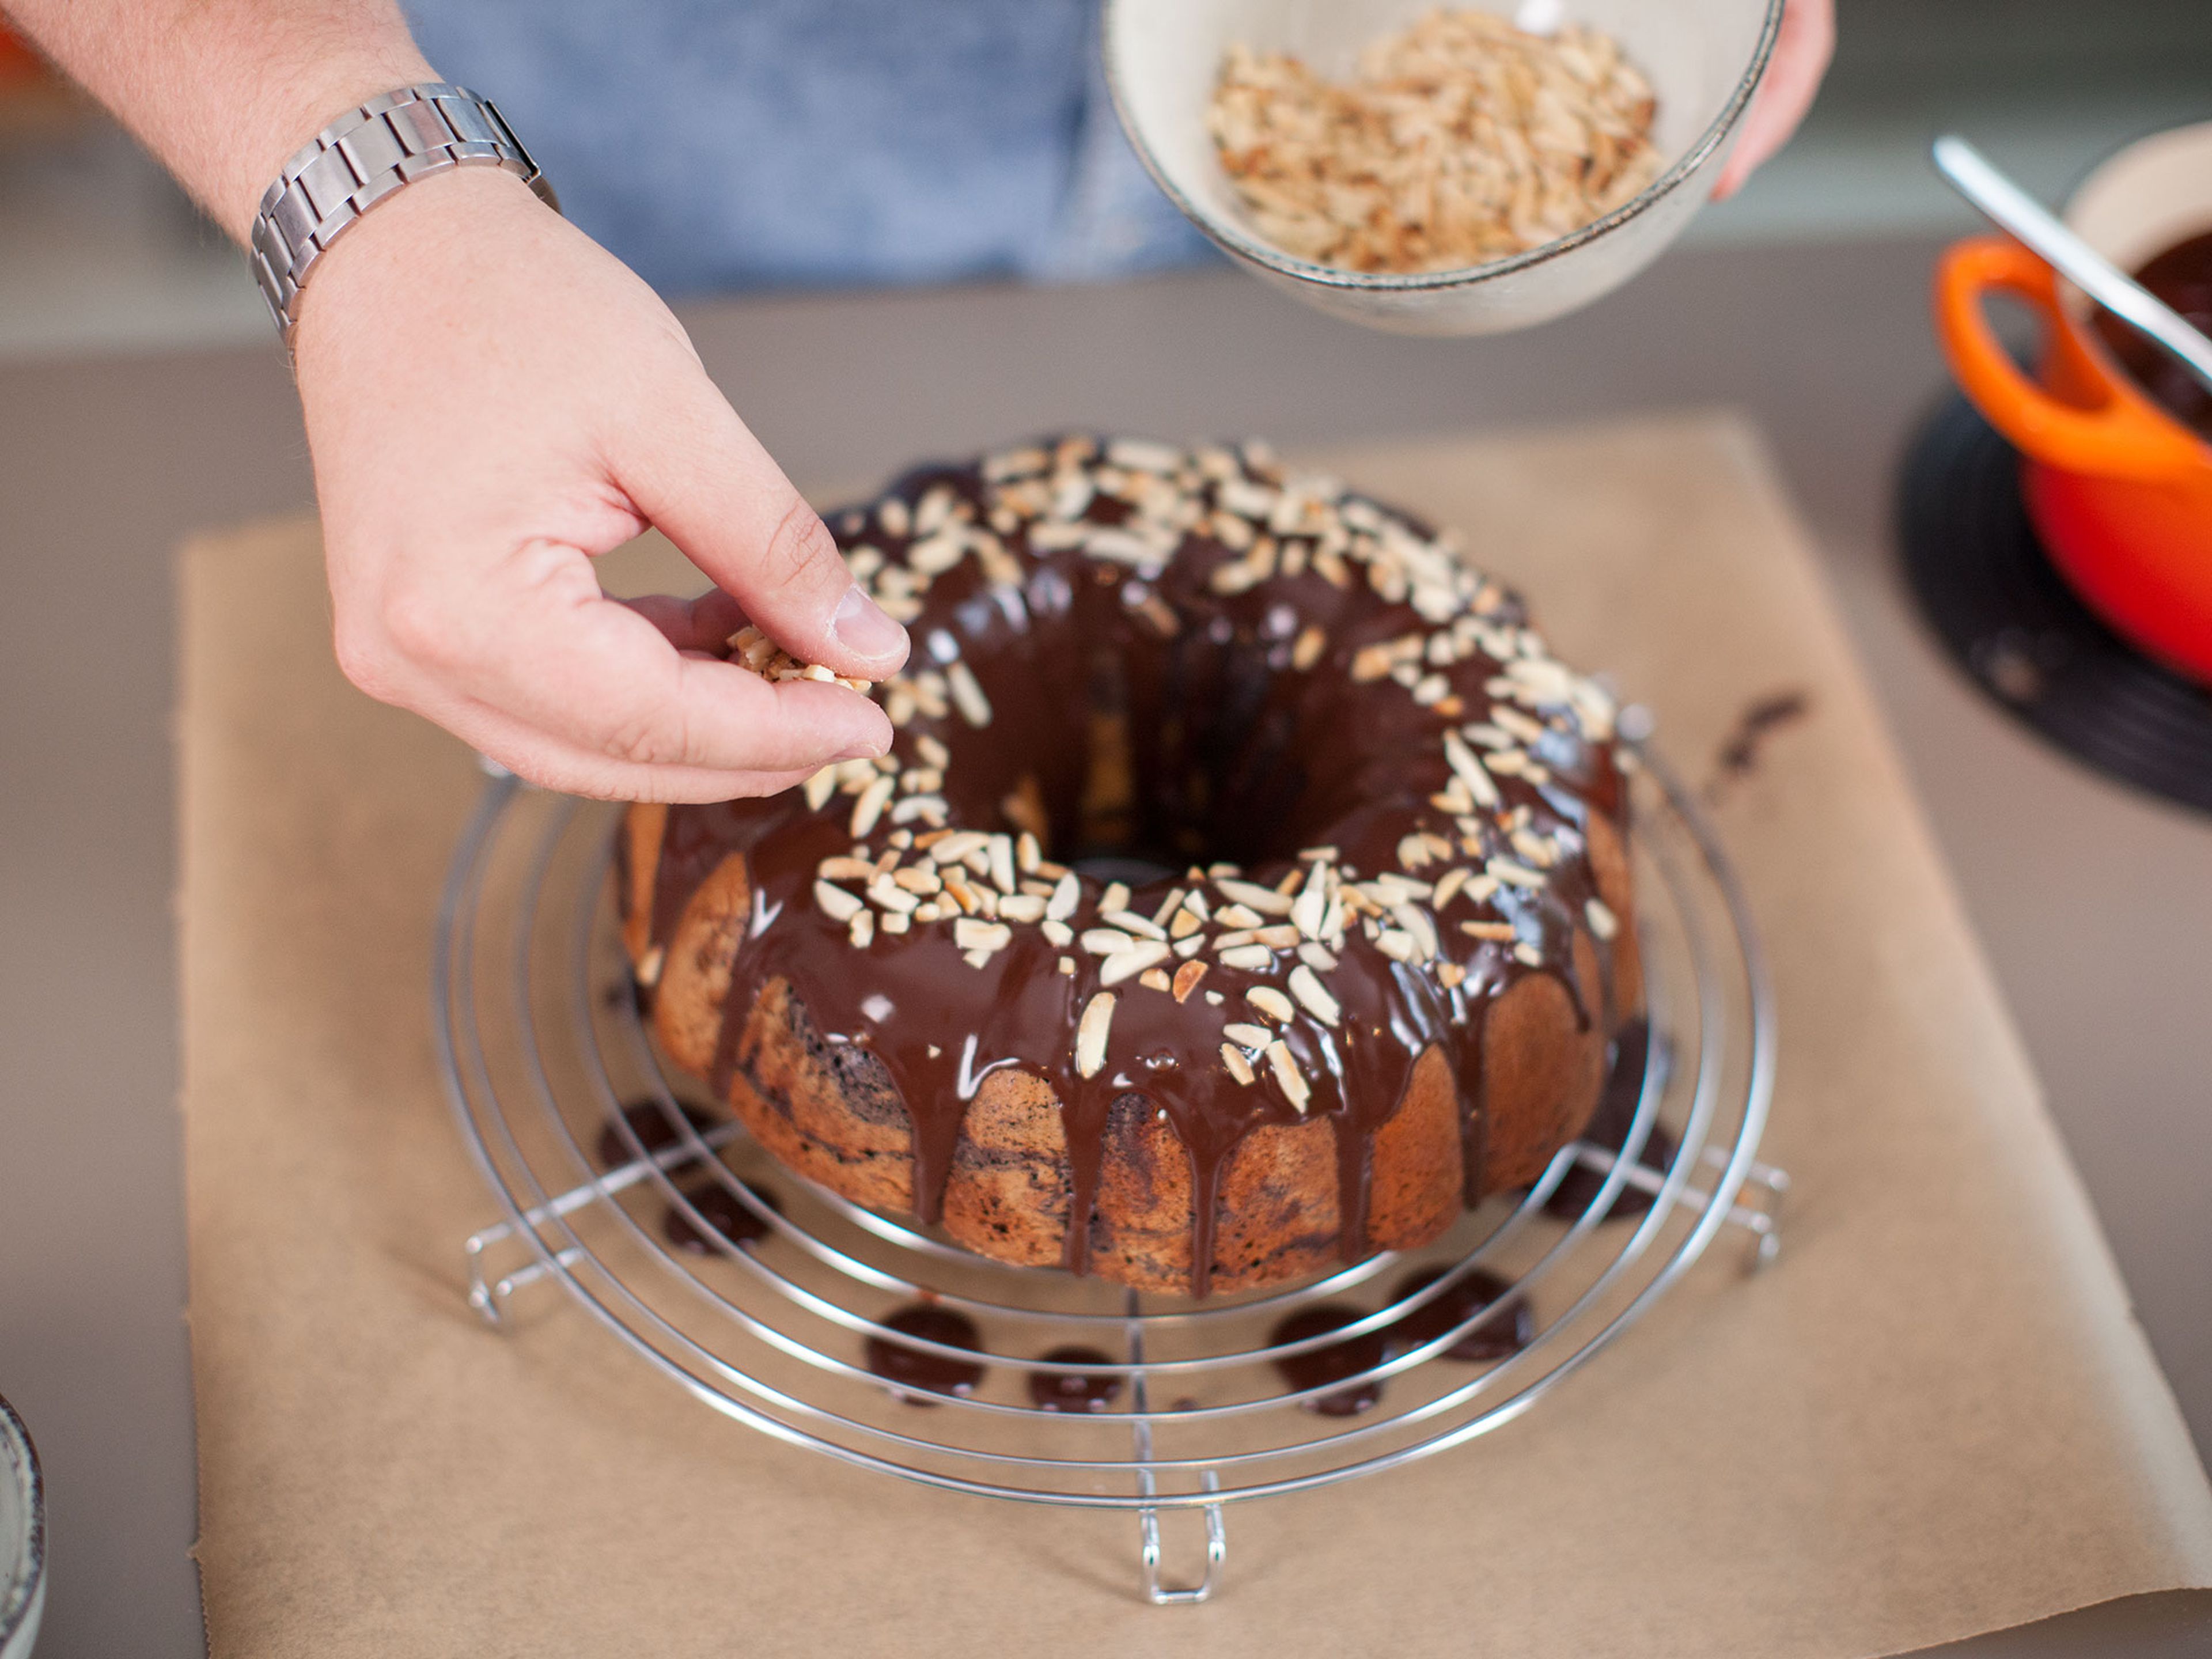 For the ganache, chop chocolate. Add whipping cream and chocolate to a small saucepan. Stirring constantly, heat until chocolate is molten and ganache is smooth. Set aside and let cool for approx. 10 min. before pouring over the Bundt cake. Sprinkle with chopped, toasted almonds if desired.